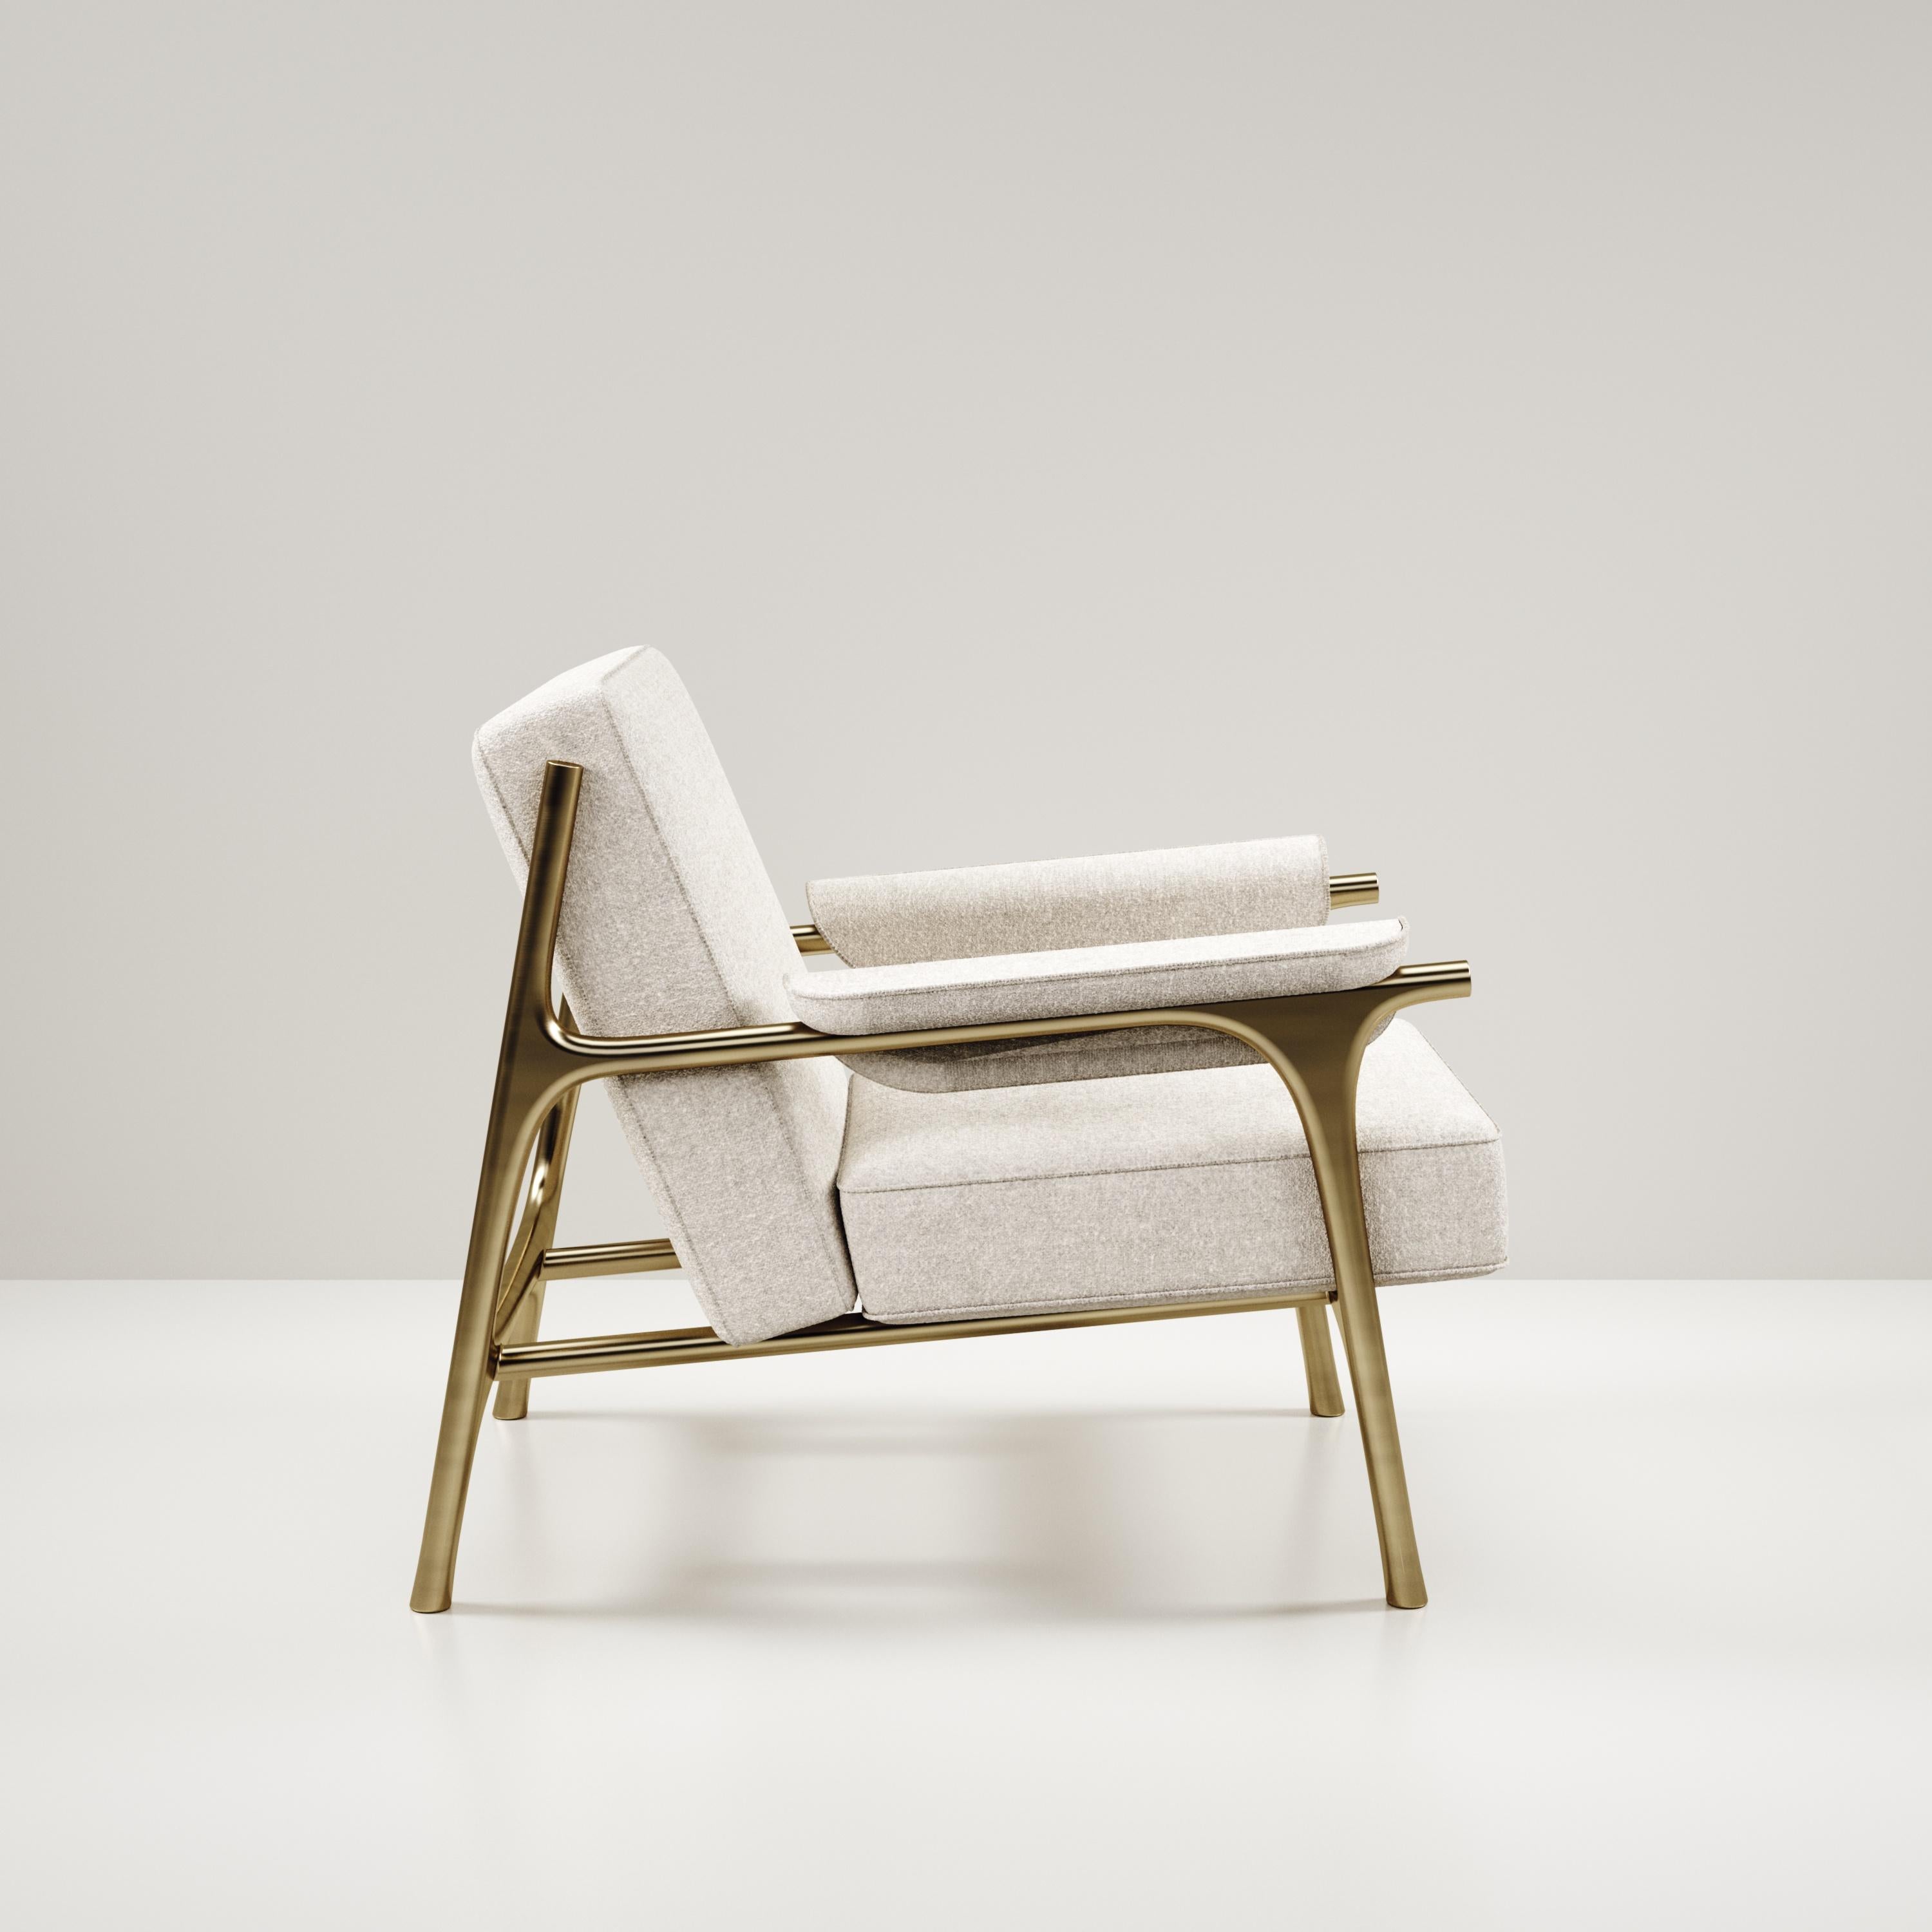 The Ramo armchair by R & Y Augousti is an elegant and versatile piece. The upholstered piece in cream Pierre Frey fabric provides comfort while retaining a unique aesthetic with the bronze-patina brass frame and details. This listing is priced for